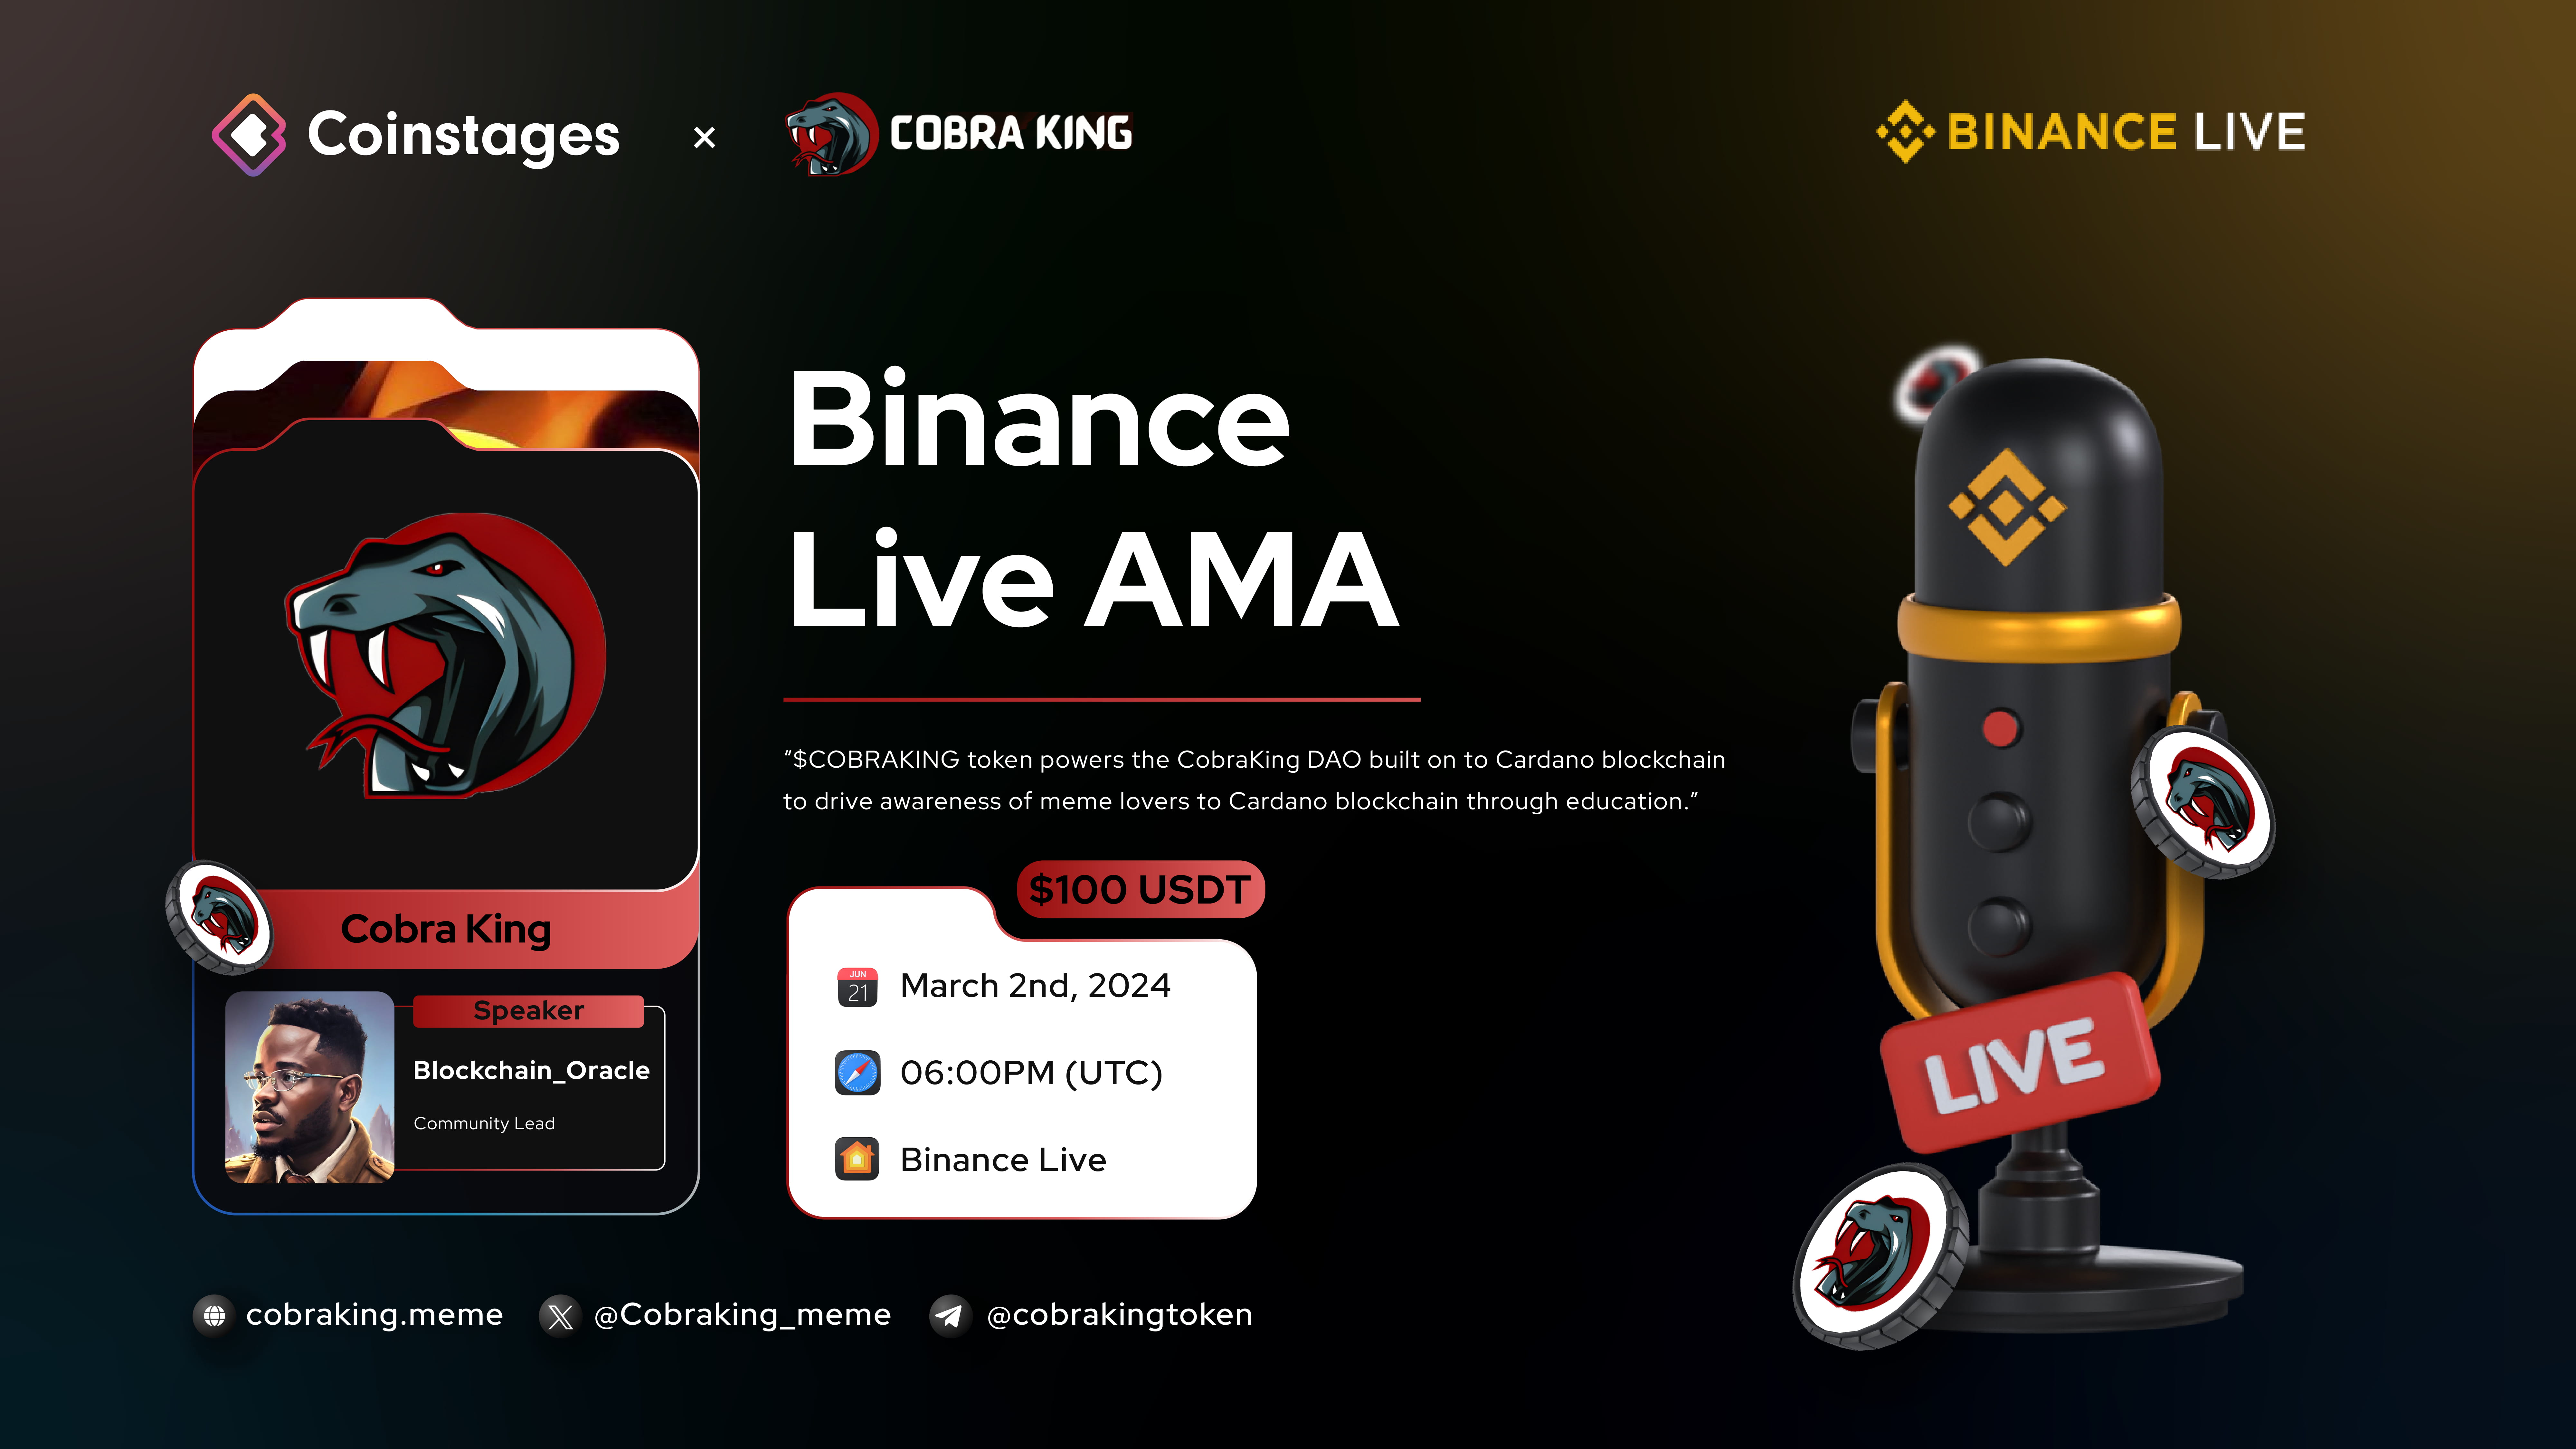 Coinstages Live AMA: Featuring Cobraking Token